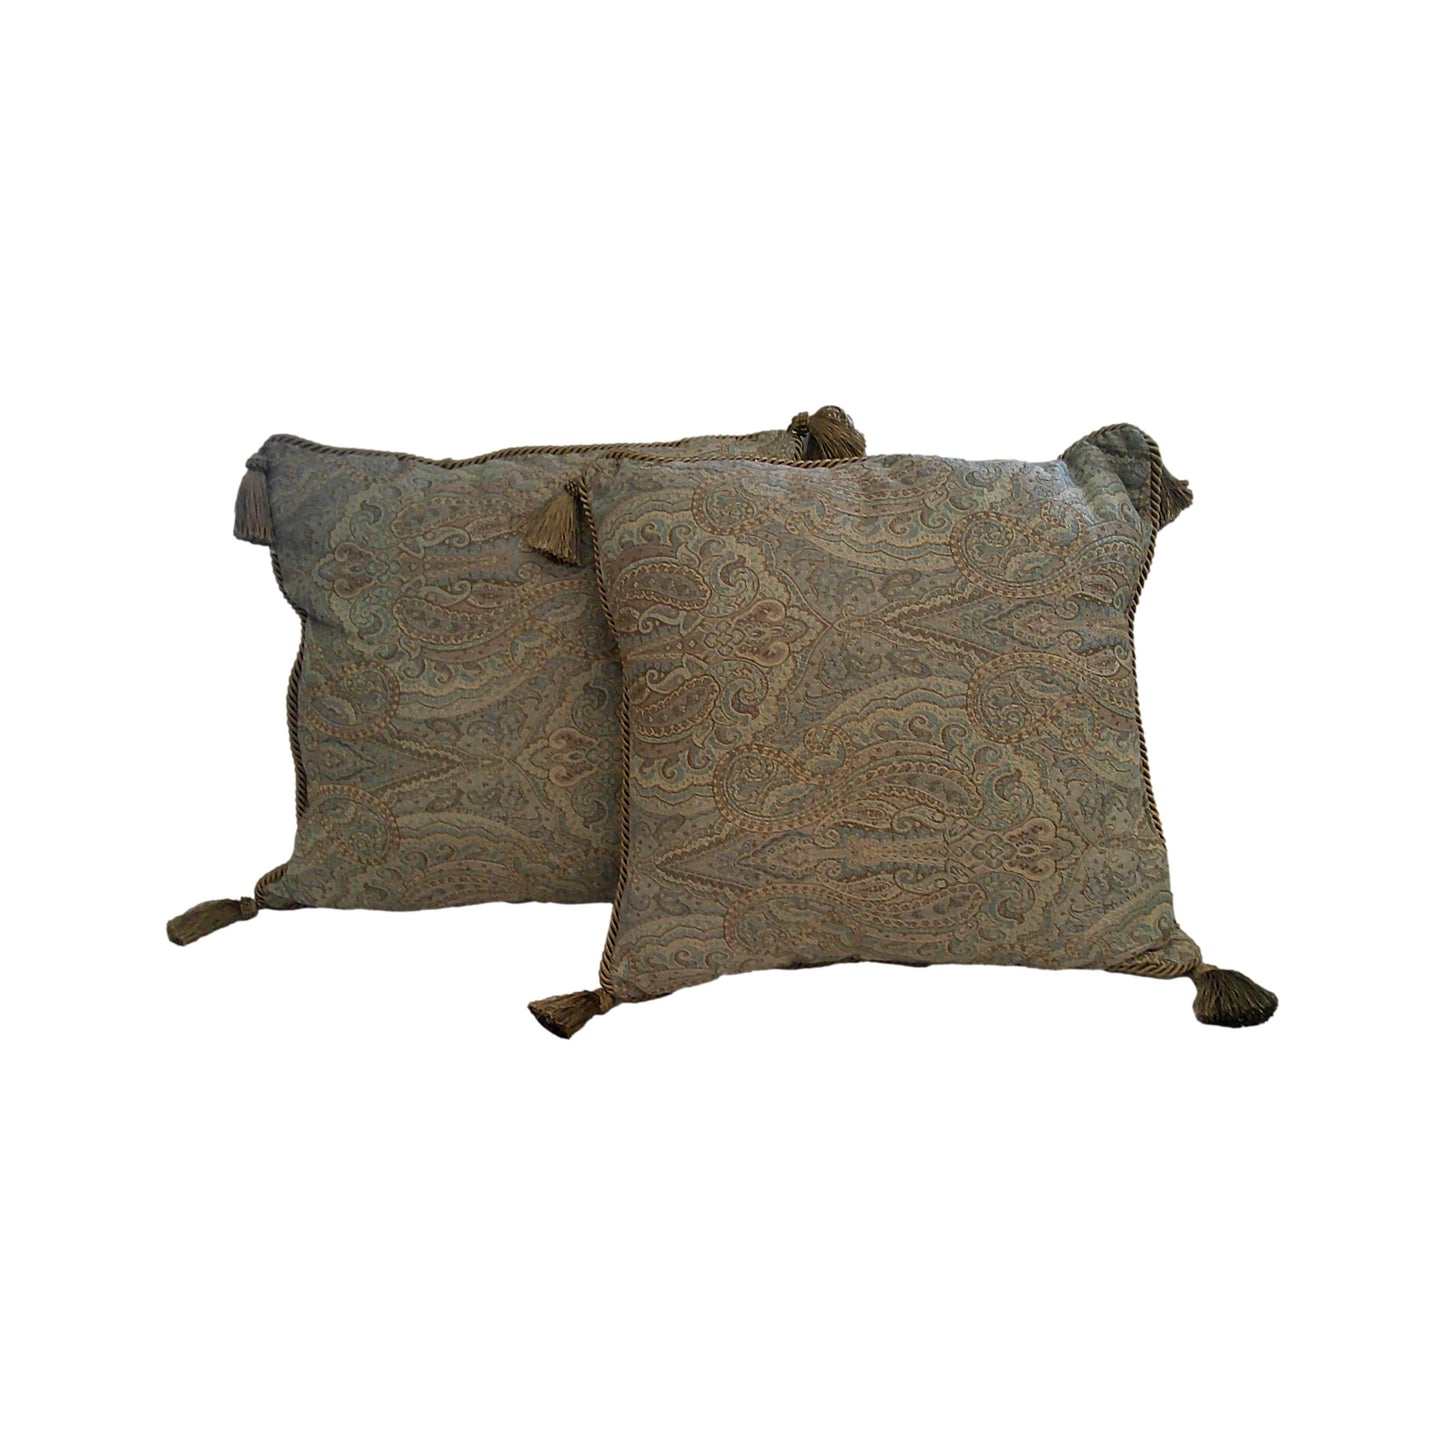 Pair of Paisley Throw Pillows With Tassles